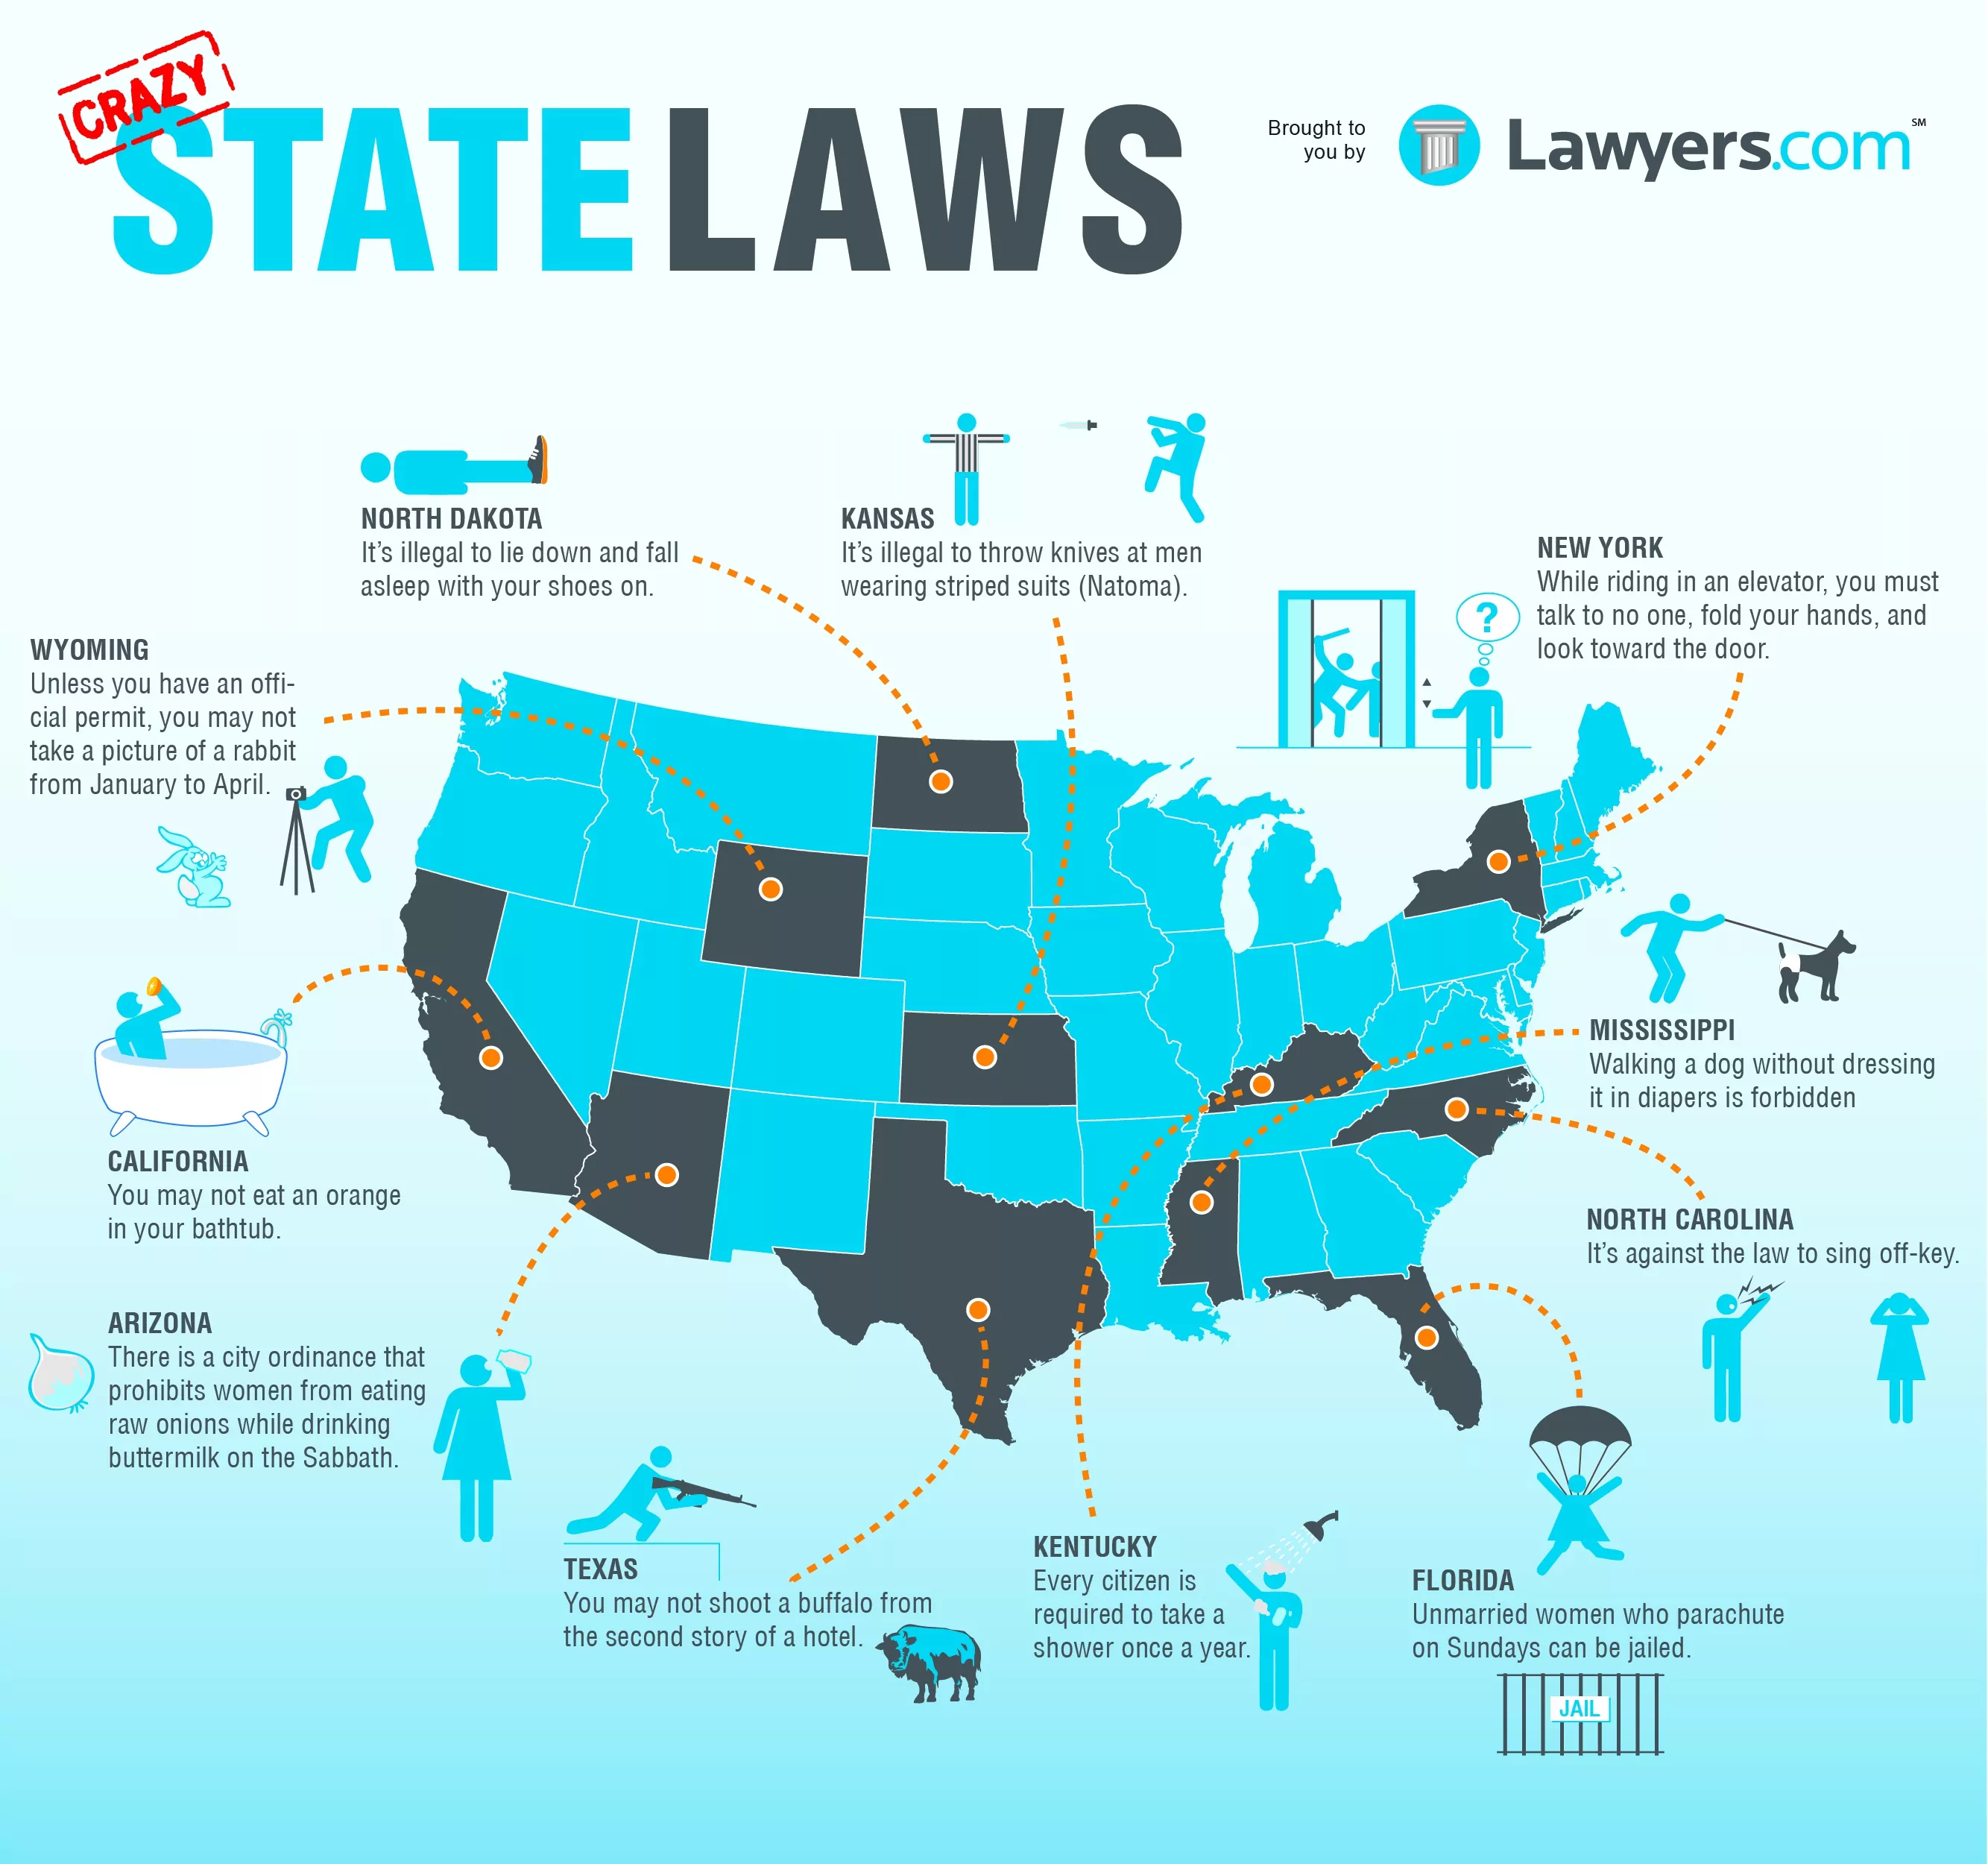 Crazy State Laws